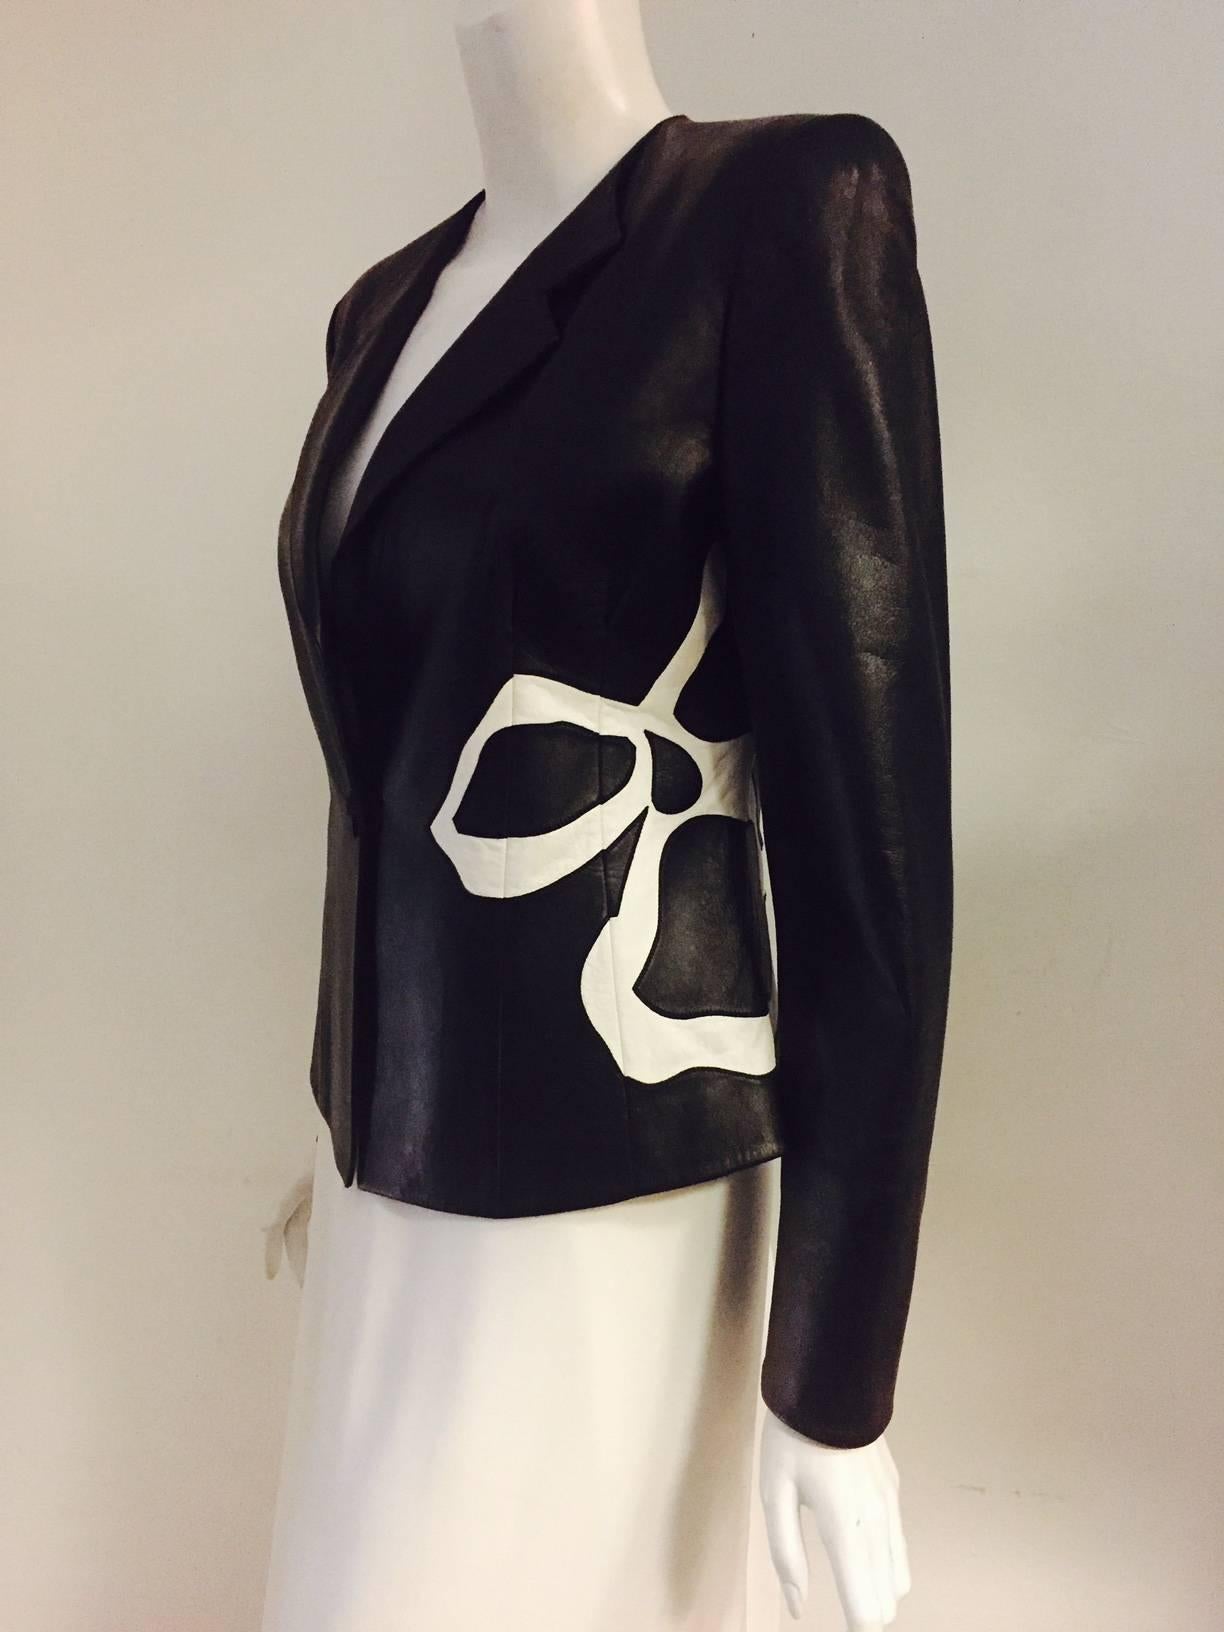 Armani Collezioni Fitted Black Leather Jacket With Abstract Floral Design  In Excellent Condition For Sale In Palm Beach, FL